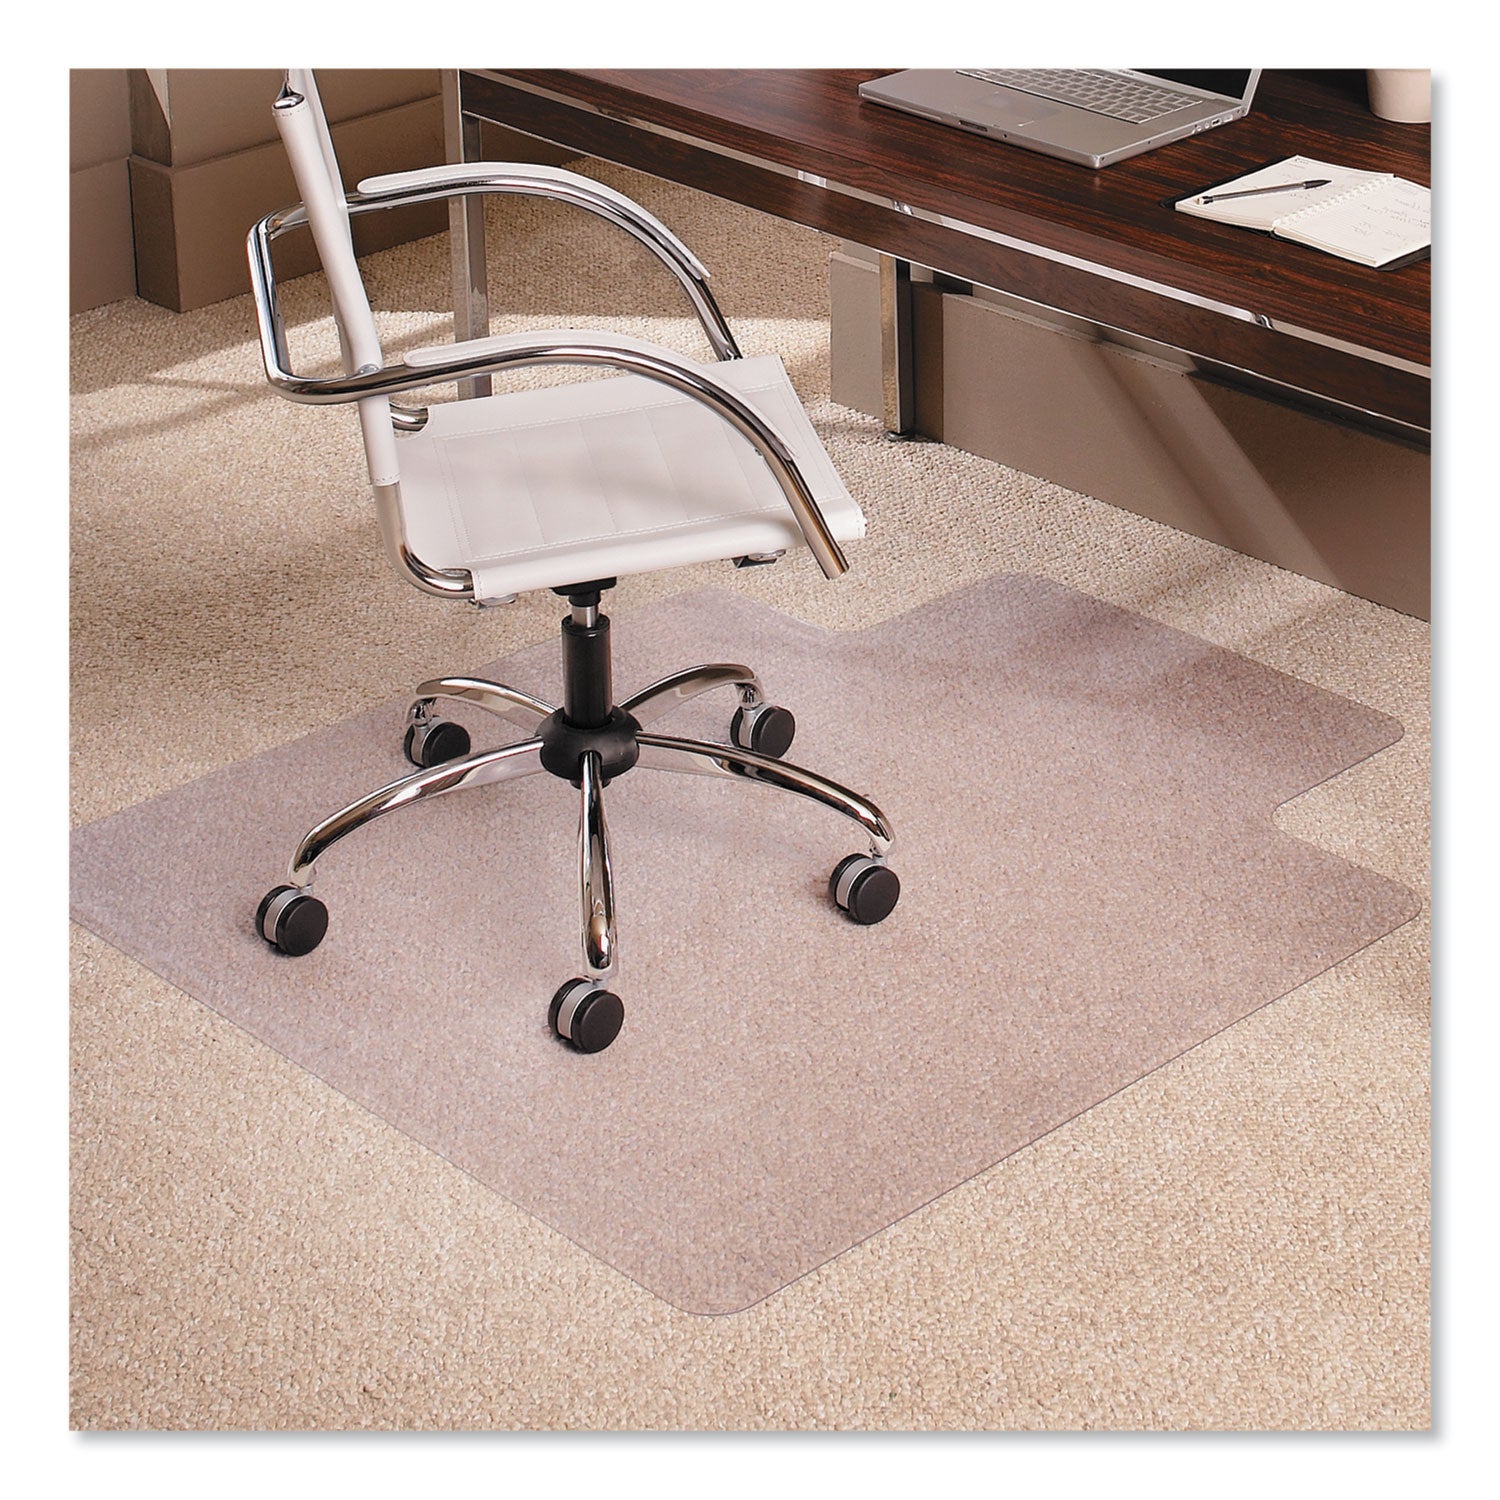 EverLife Moderate Use Chair Mat for Low Pile Carpet, Rectangular with Lip, 36 x 48, Clear - 